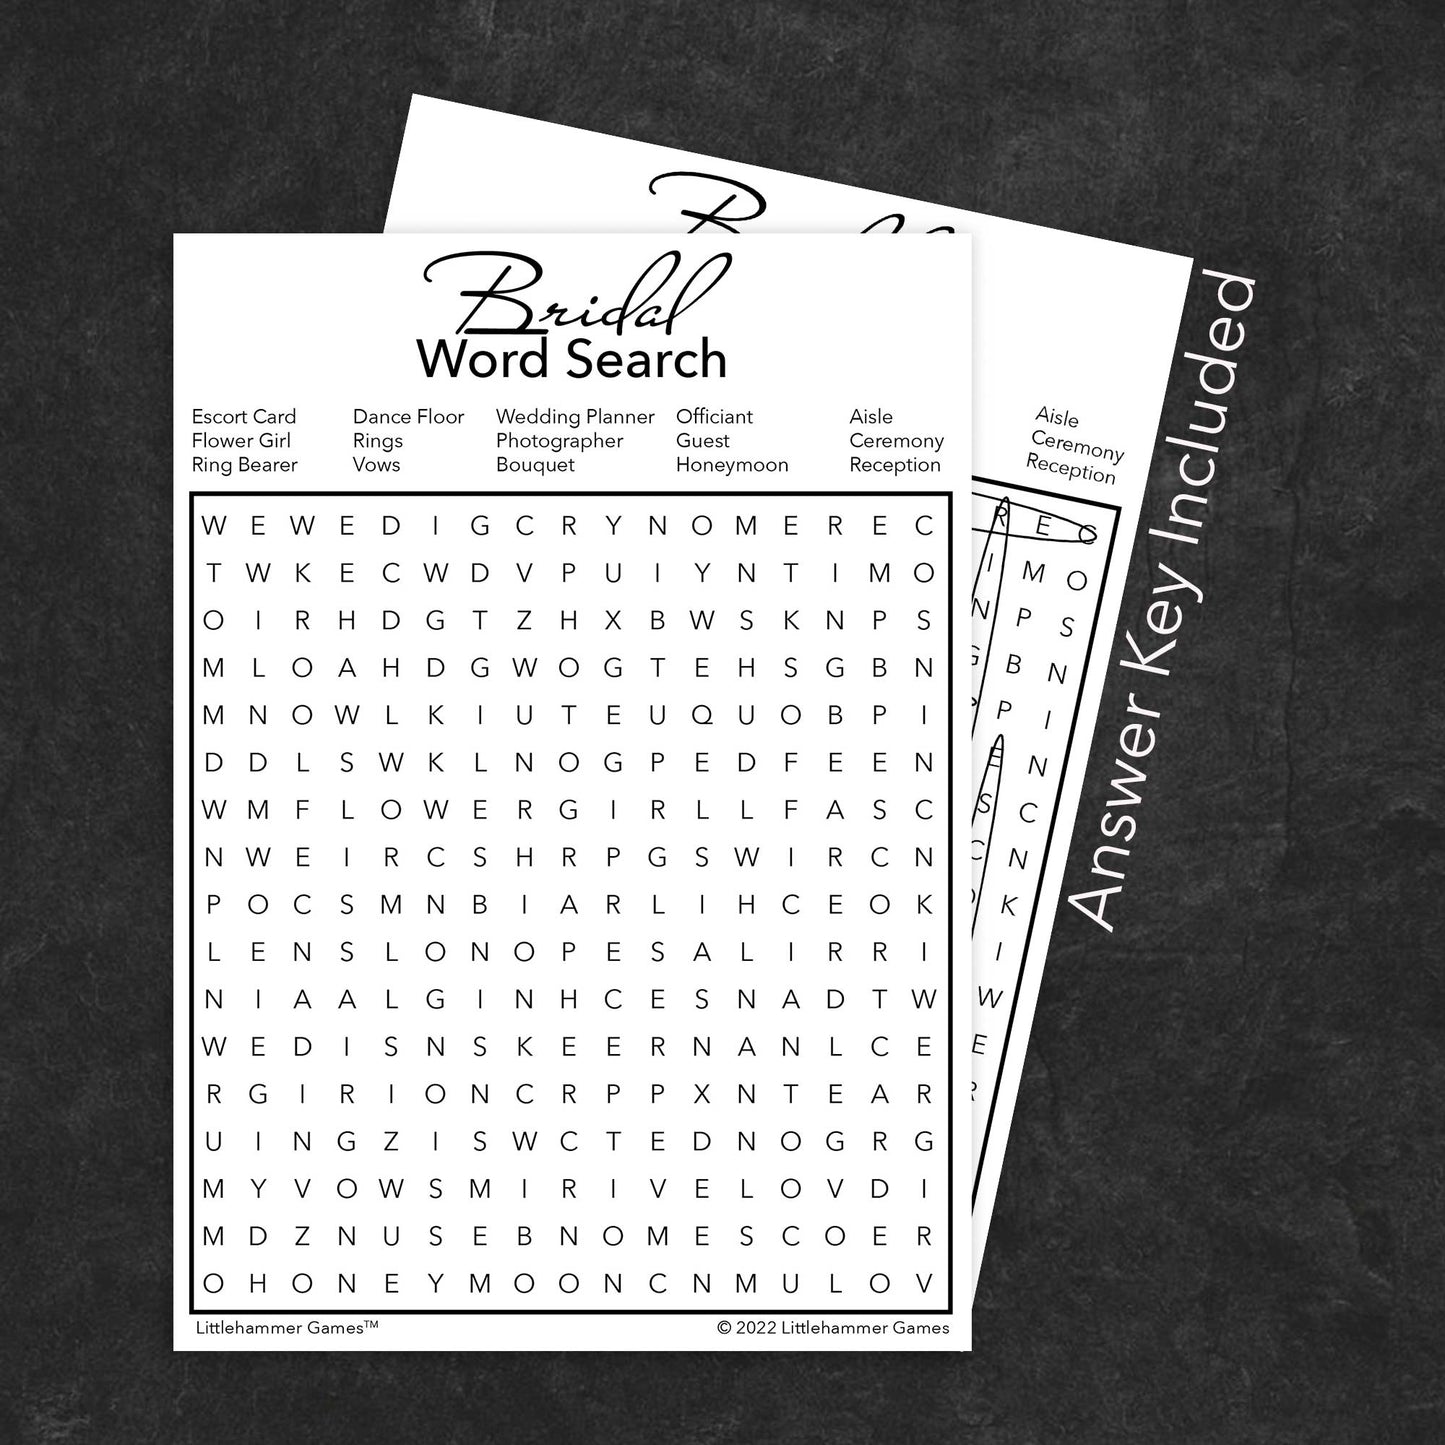 Bridal Word Search game card with a minimalist black and white background with answer card tucked behind it on a slate background with white text that says "Answer Key Included"